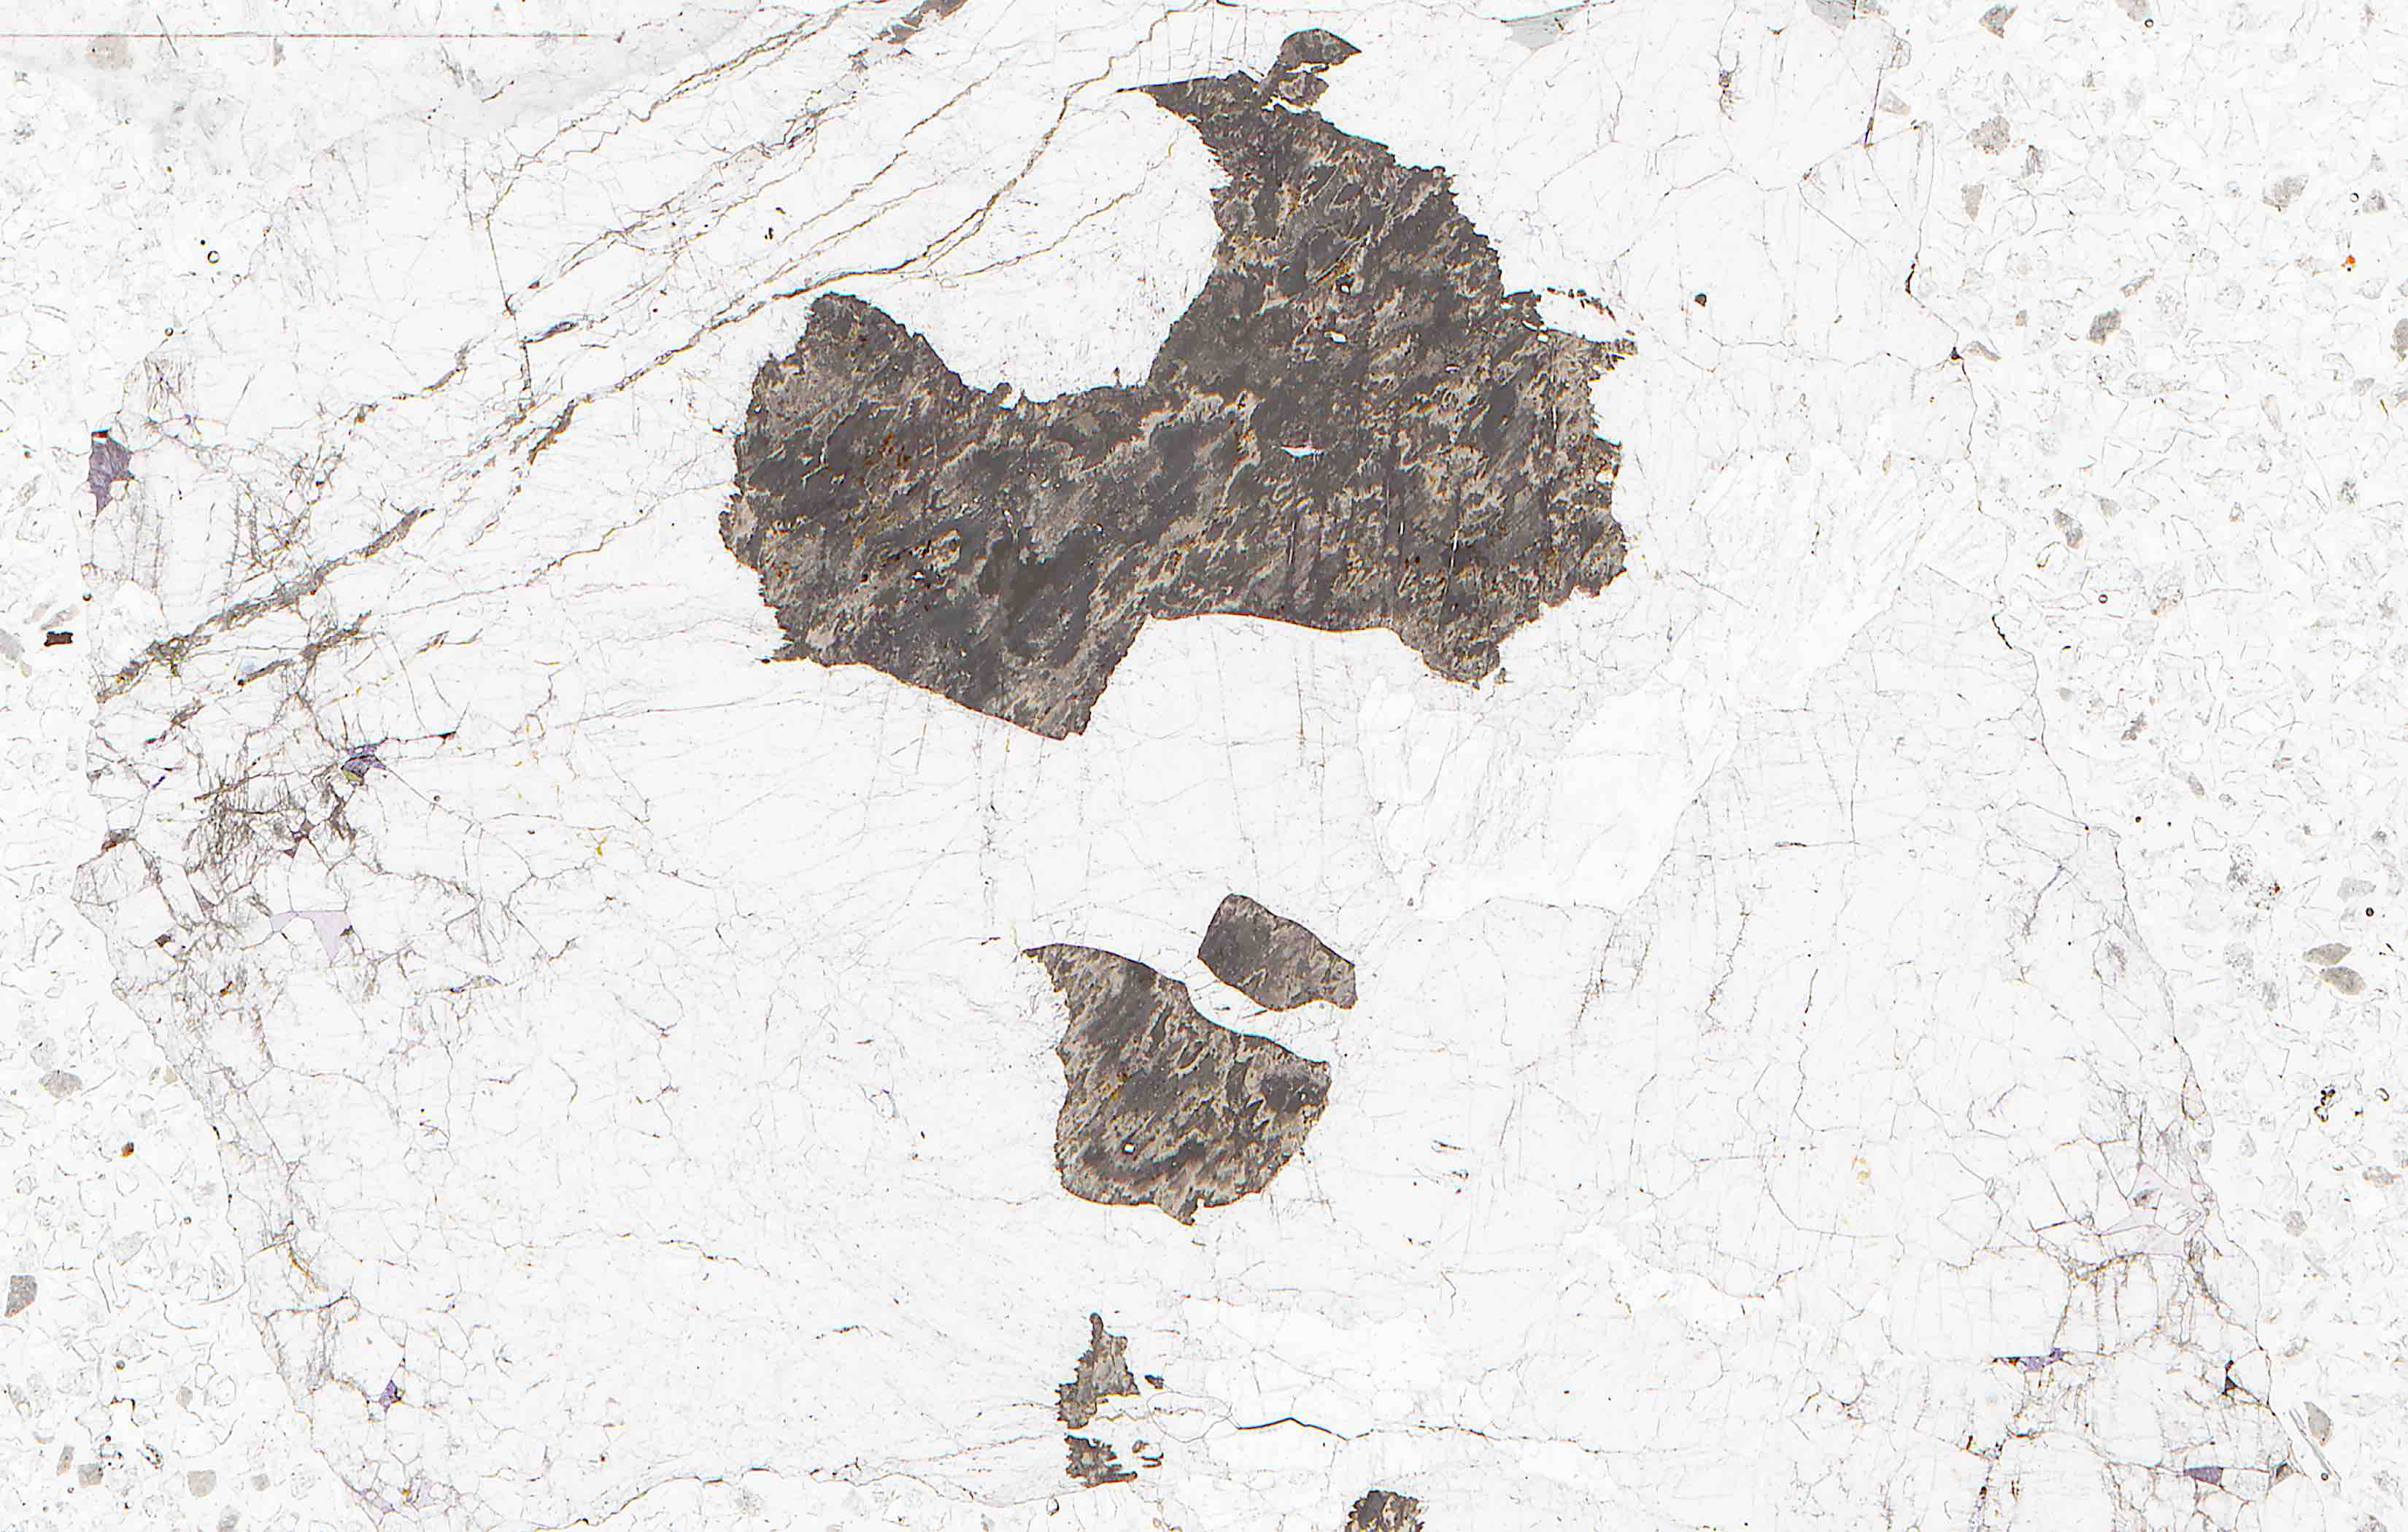 gittinsite vlasovite and eudialyte in thin section from Kipawa Canada